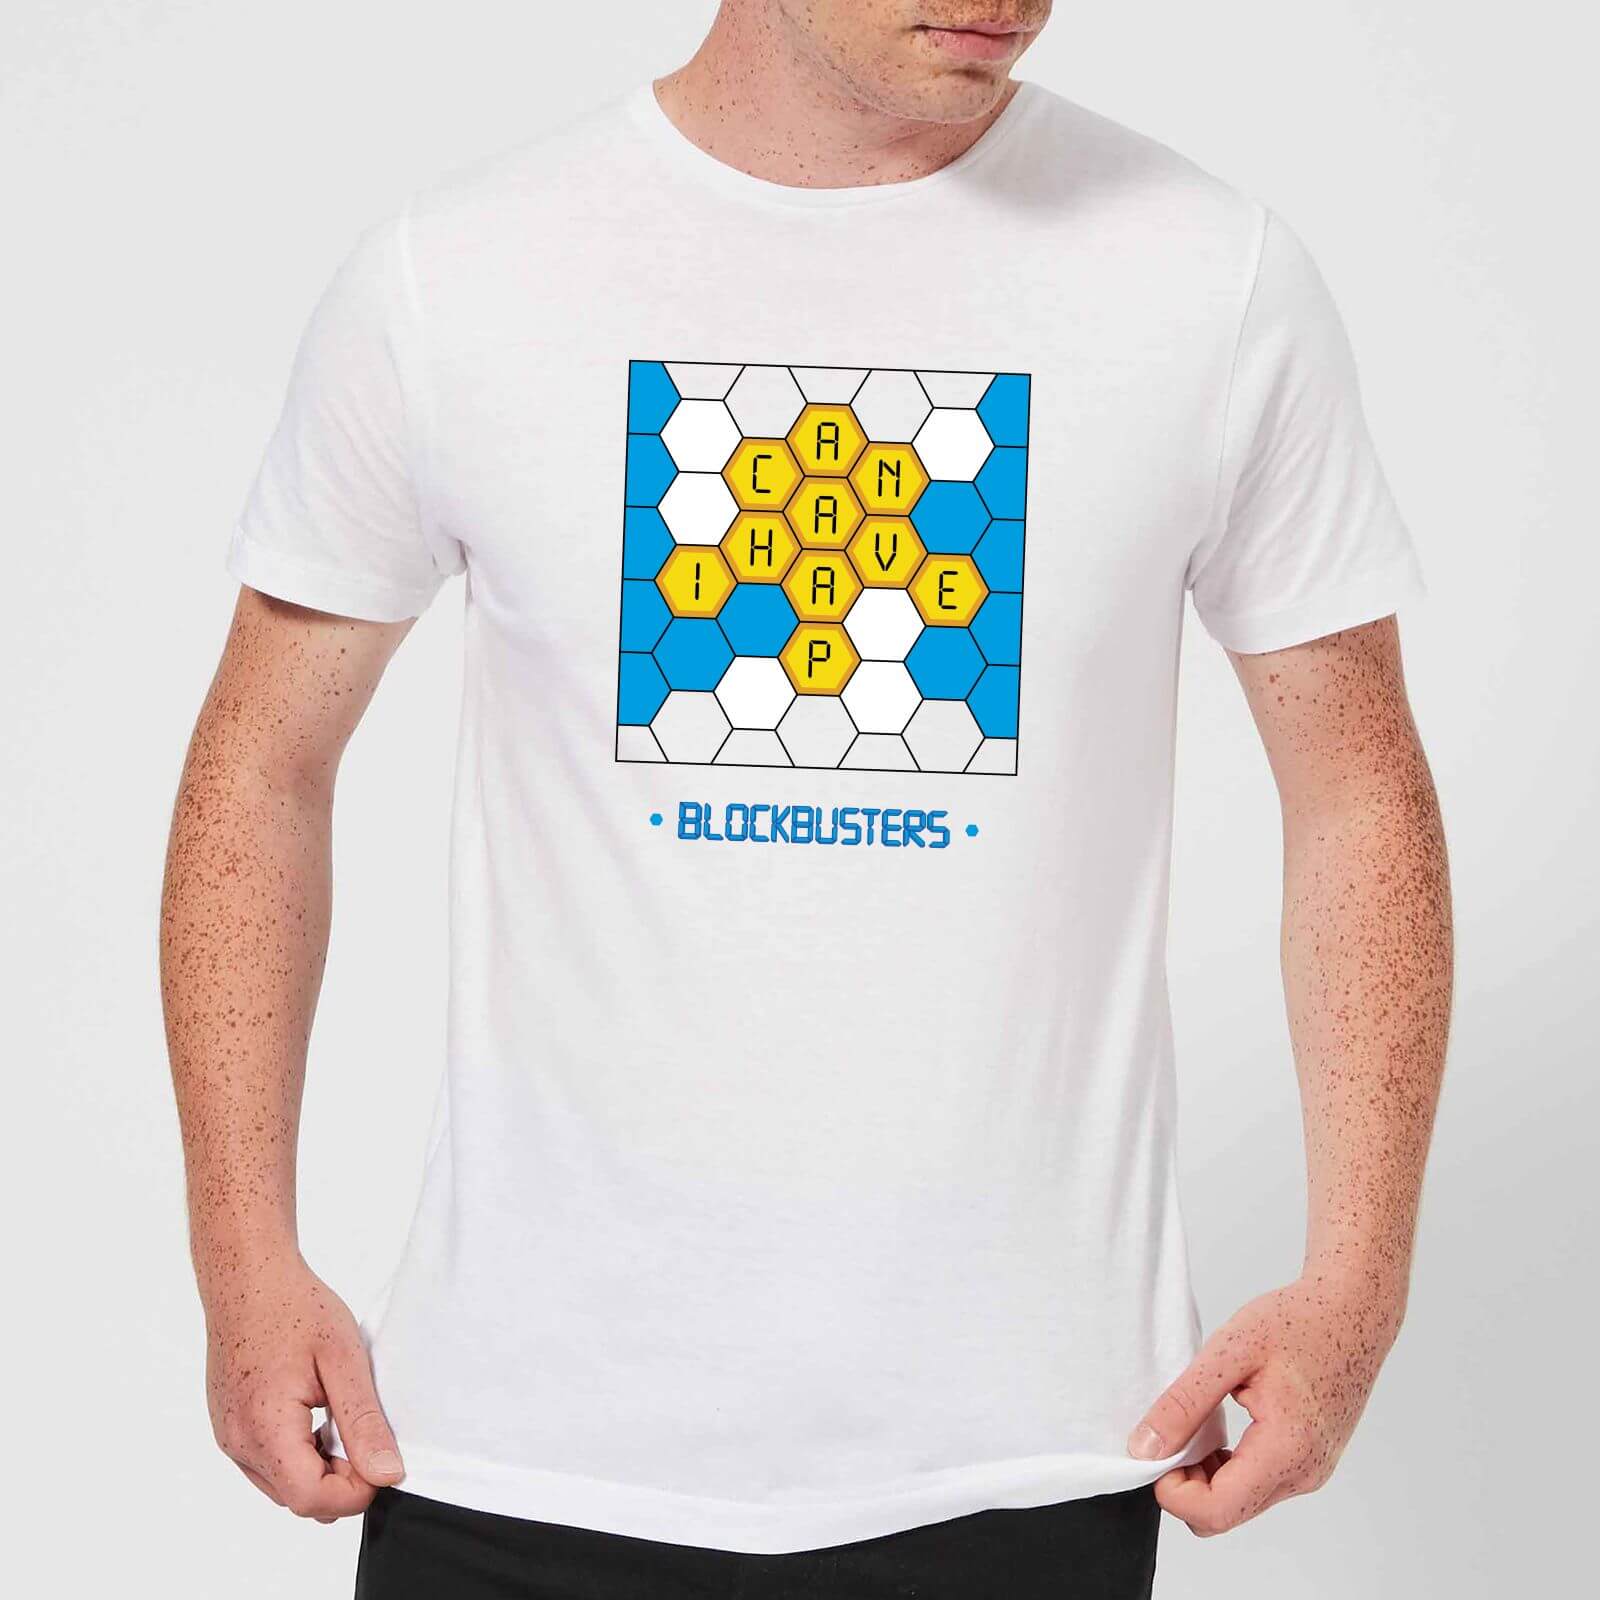 Blockbusters Can I Have A 'P' Men's T-Shirt - White - S - White